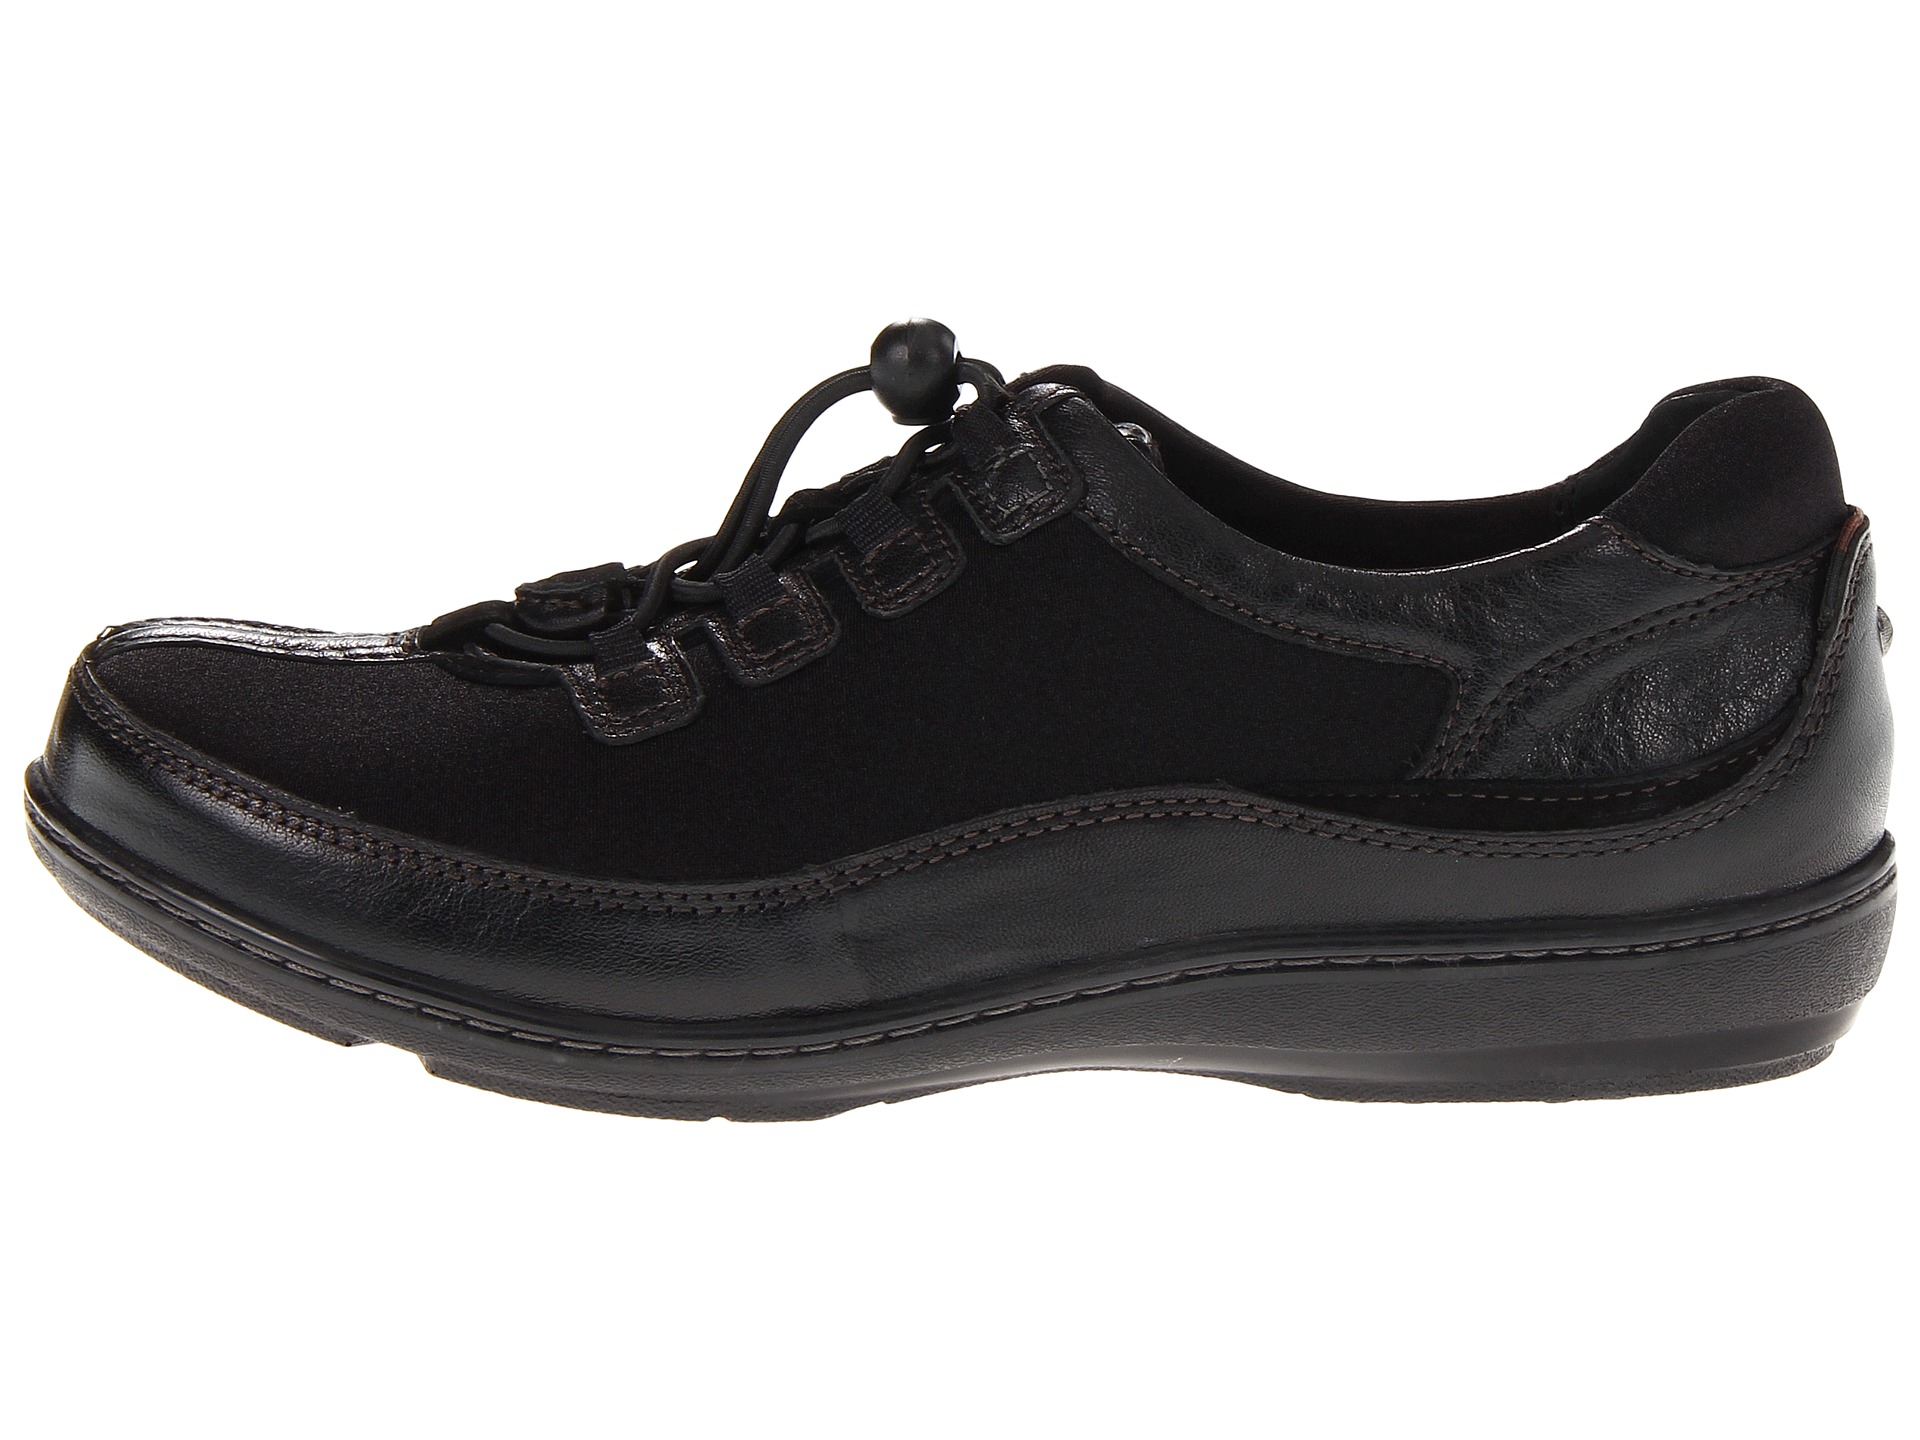 Aetrex Berries™ Bungee Oxford at Zappos.com